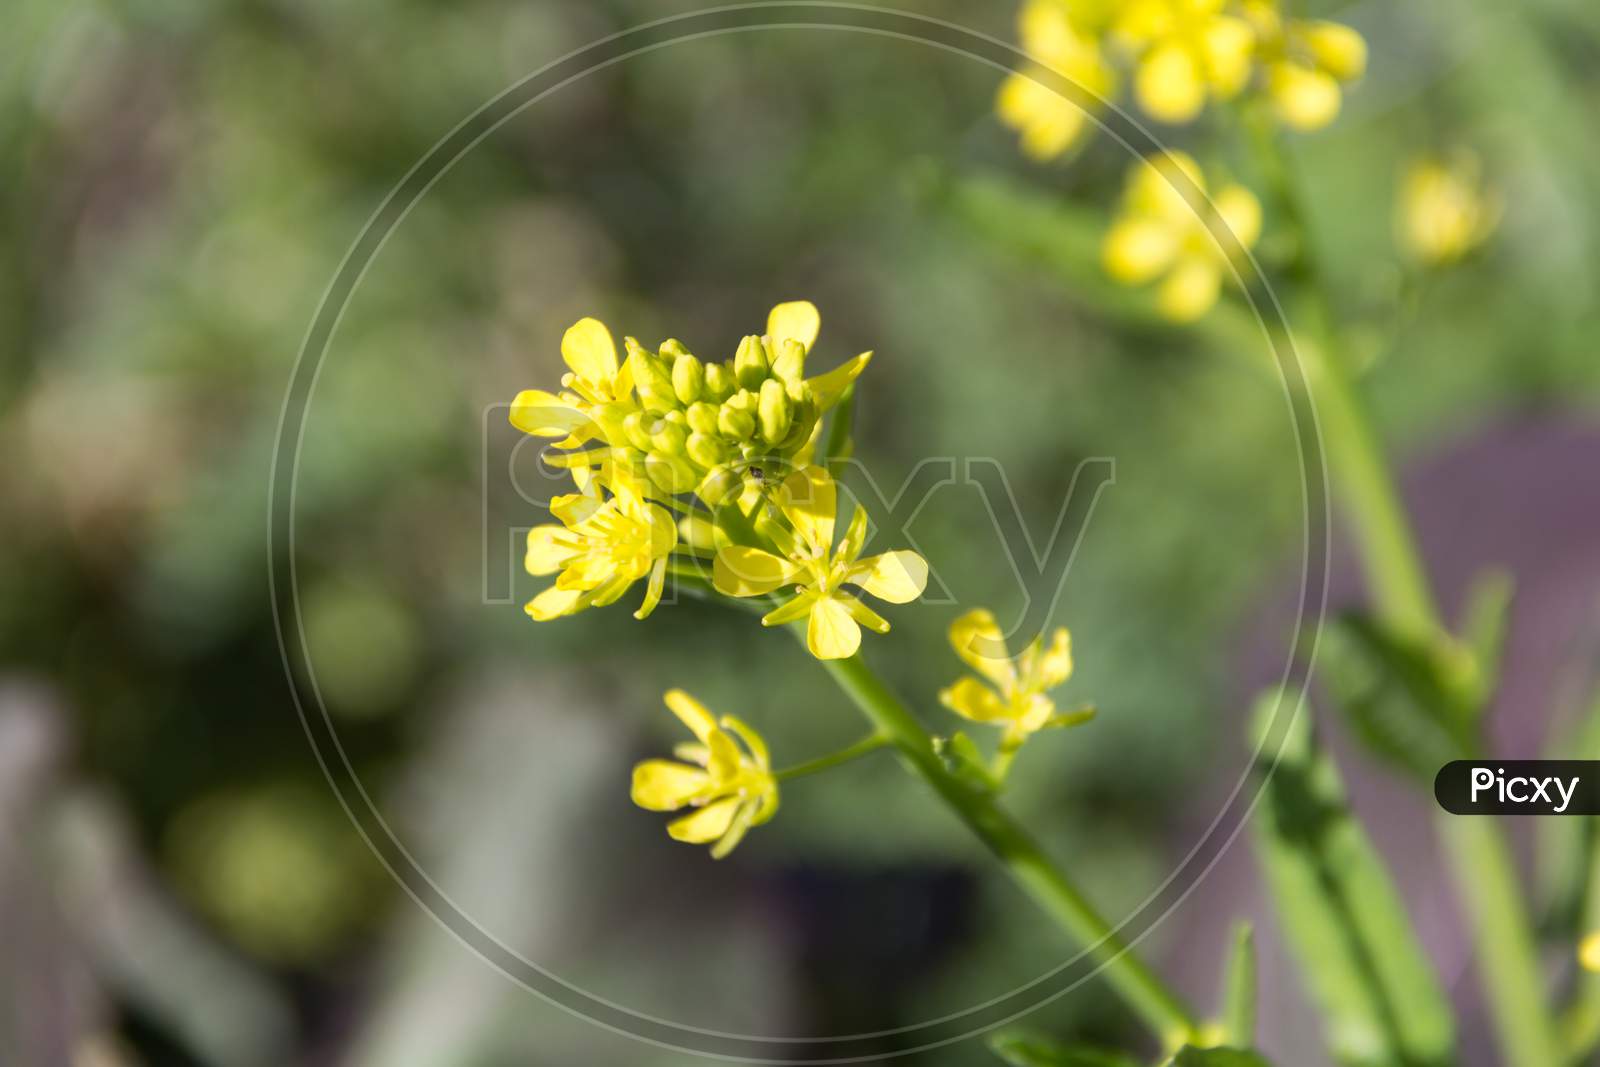 Yellow Rapeseed Flowers In Spring